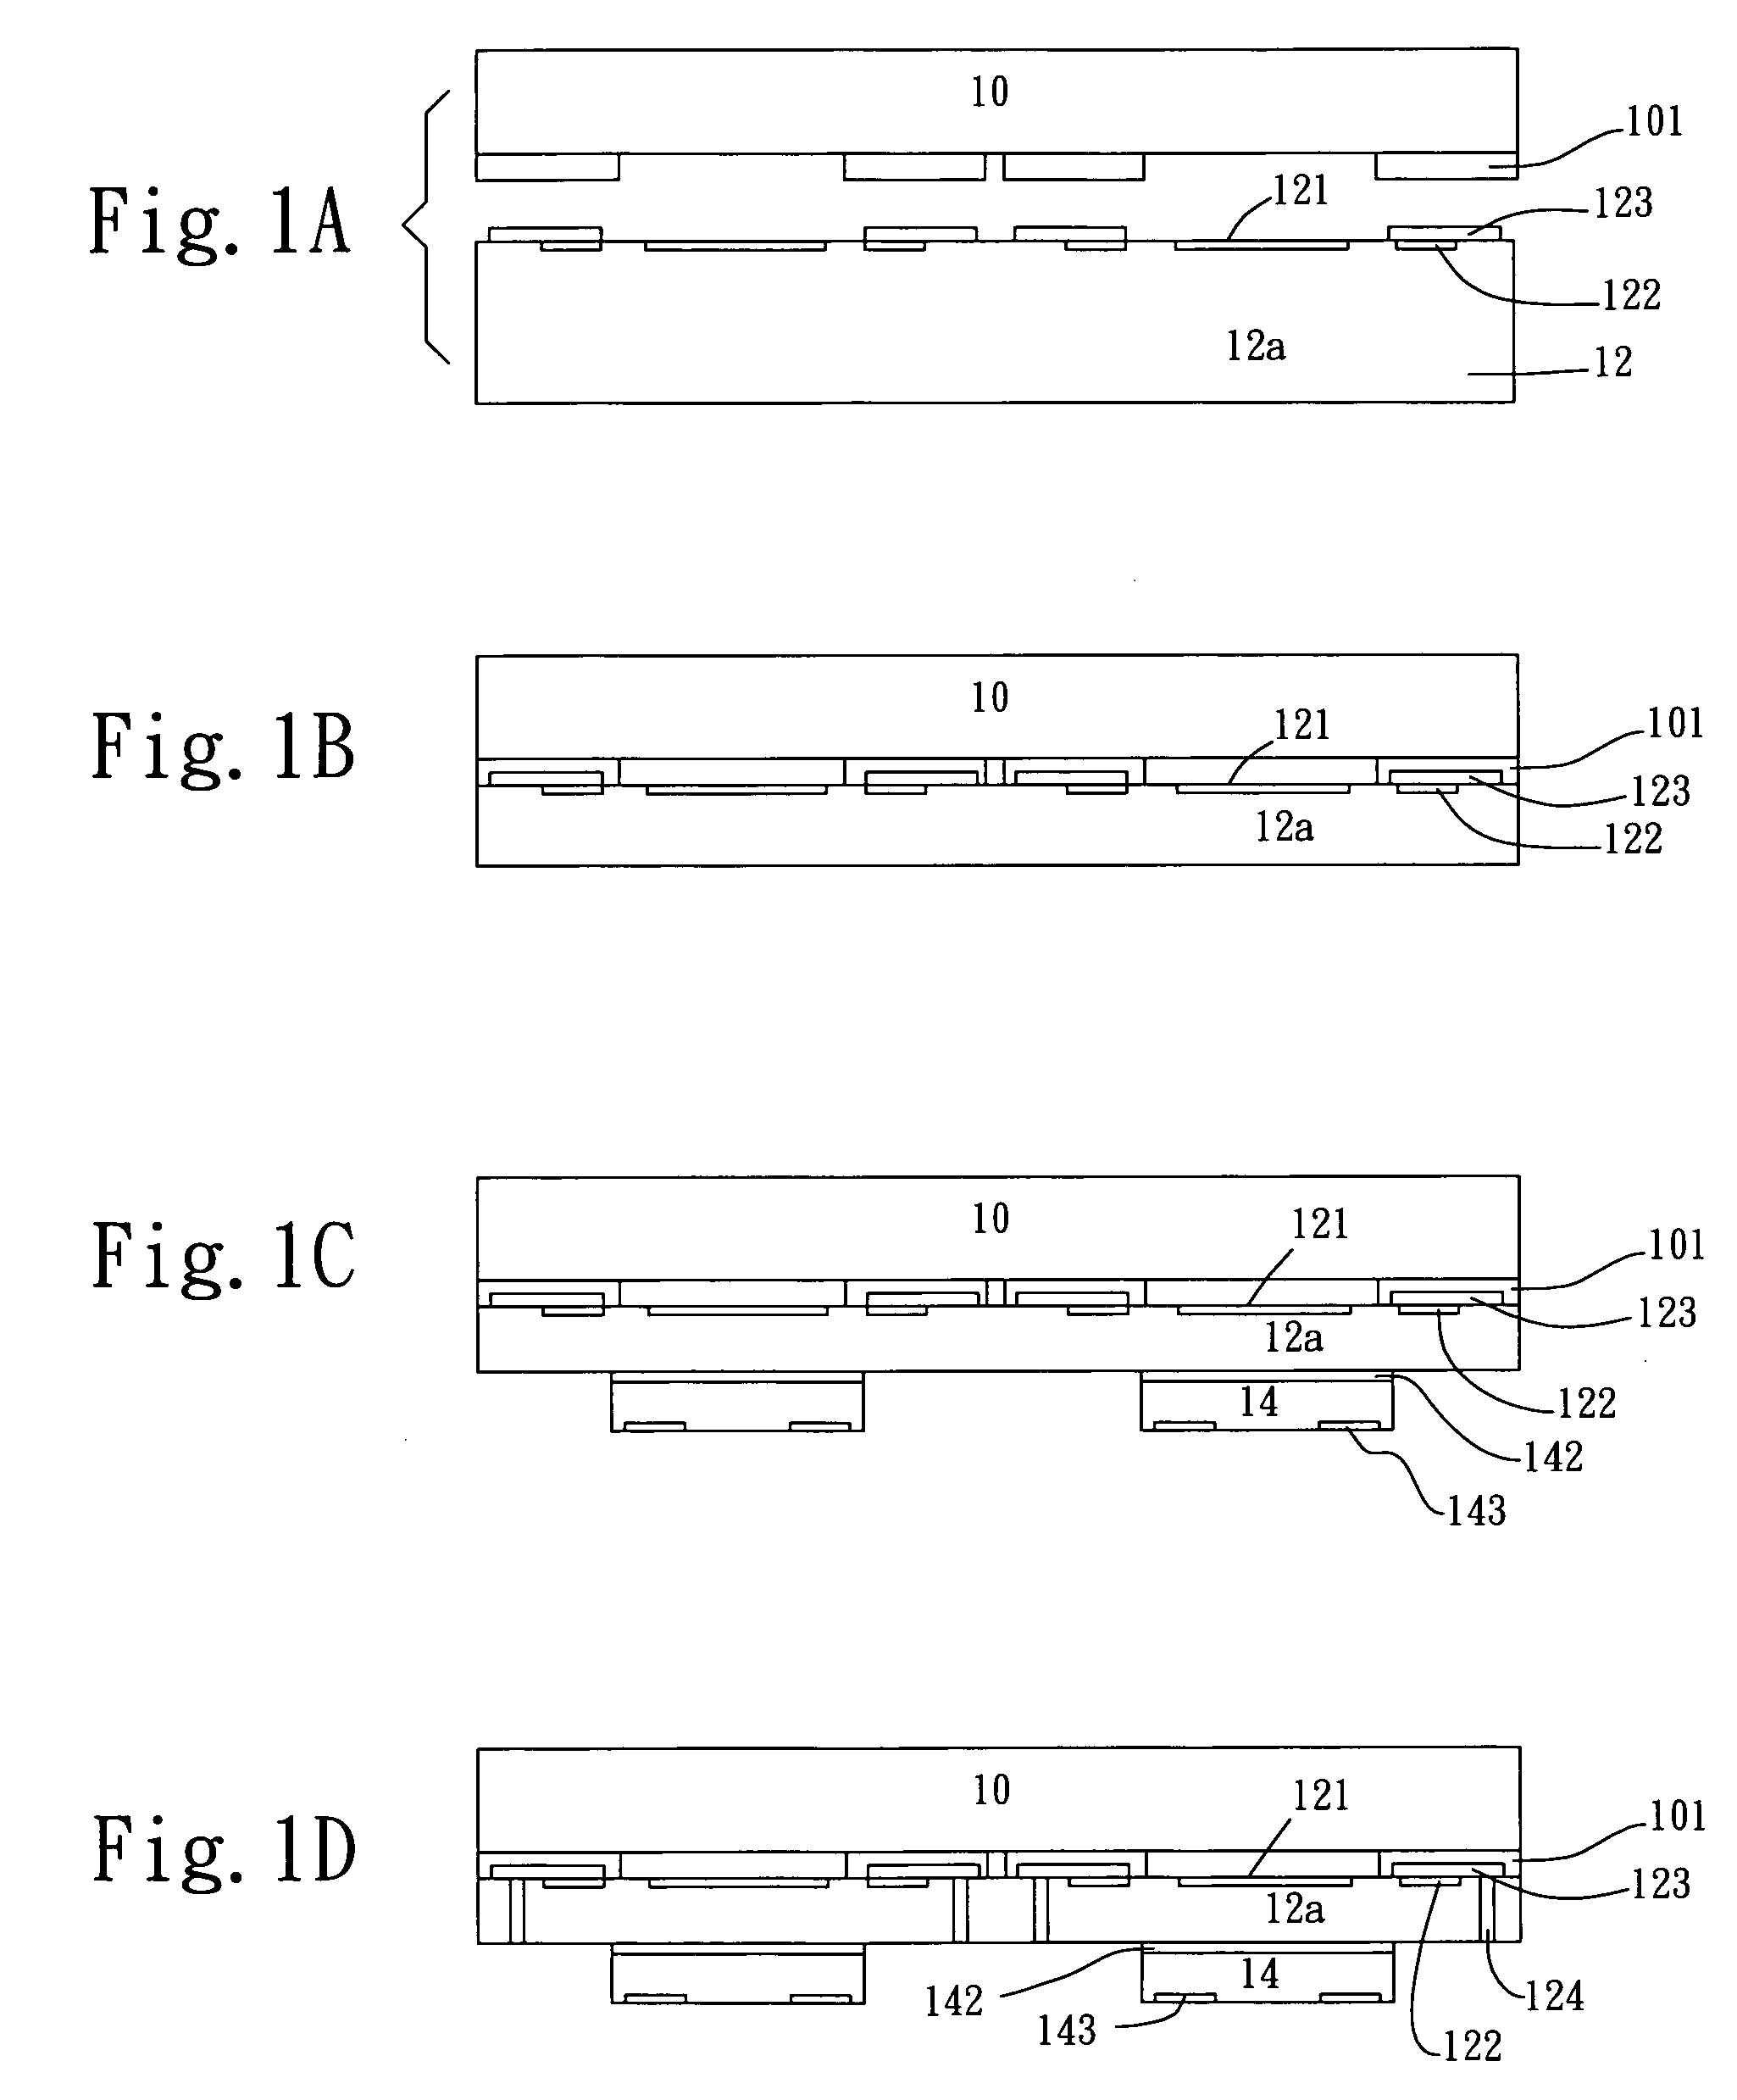 Image sensor module with a three-dimensional die-stacking structure